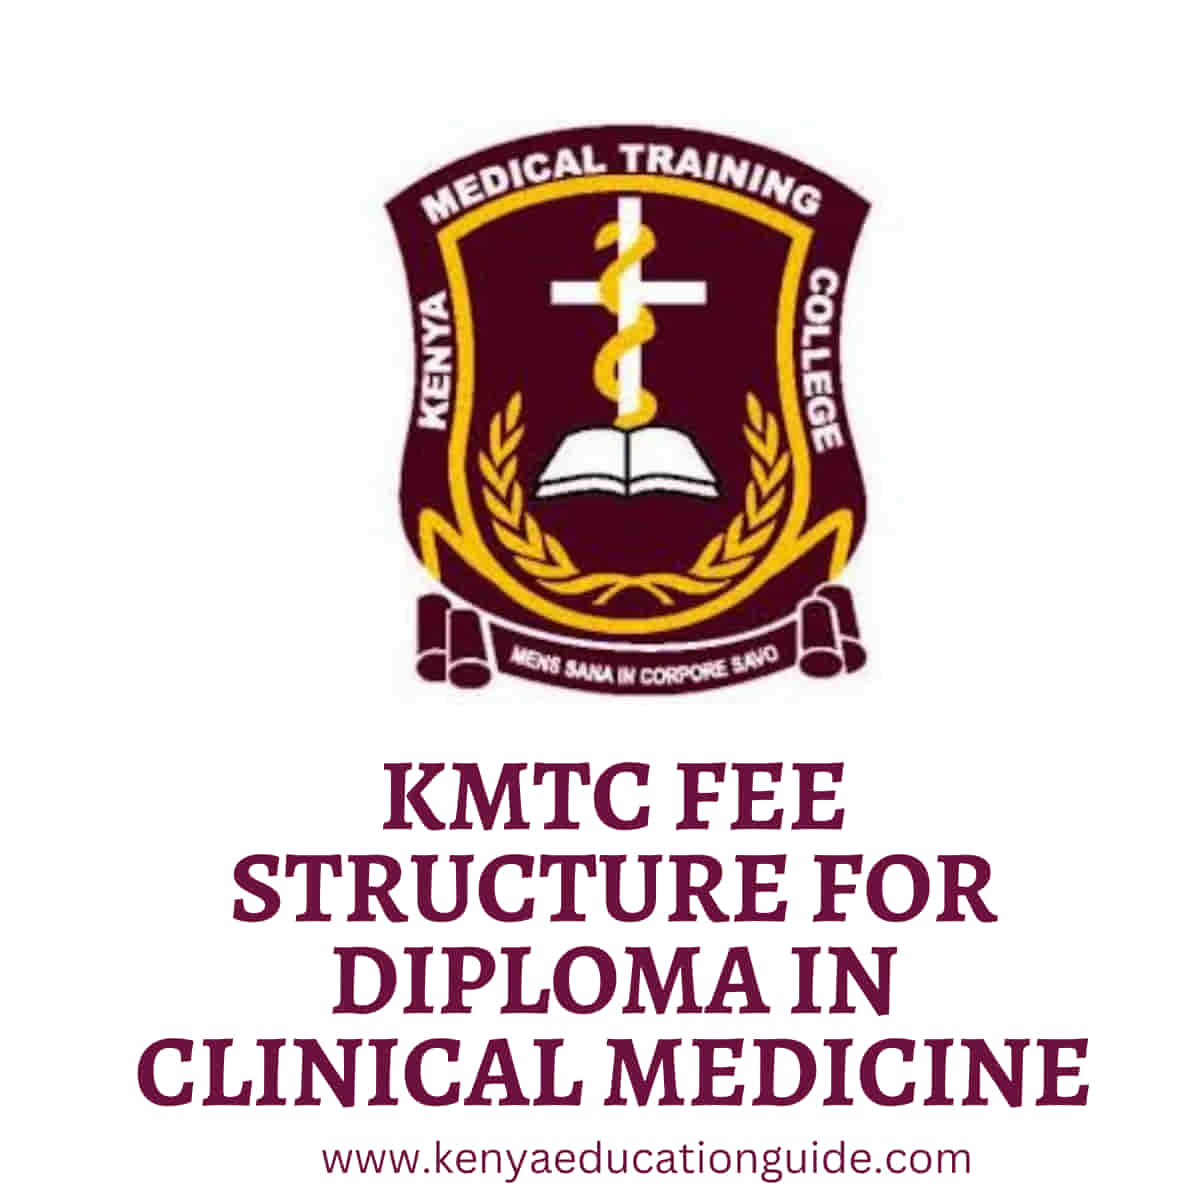 KMTC fee structure for diploma in clinical medicine